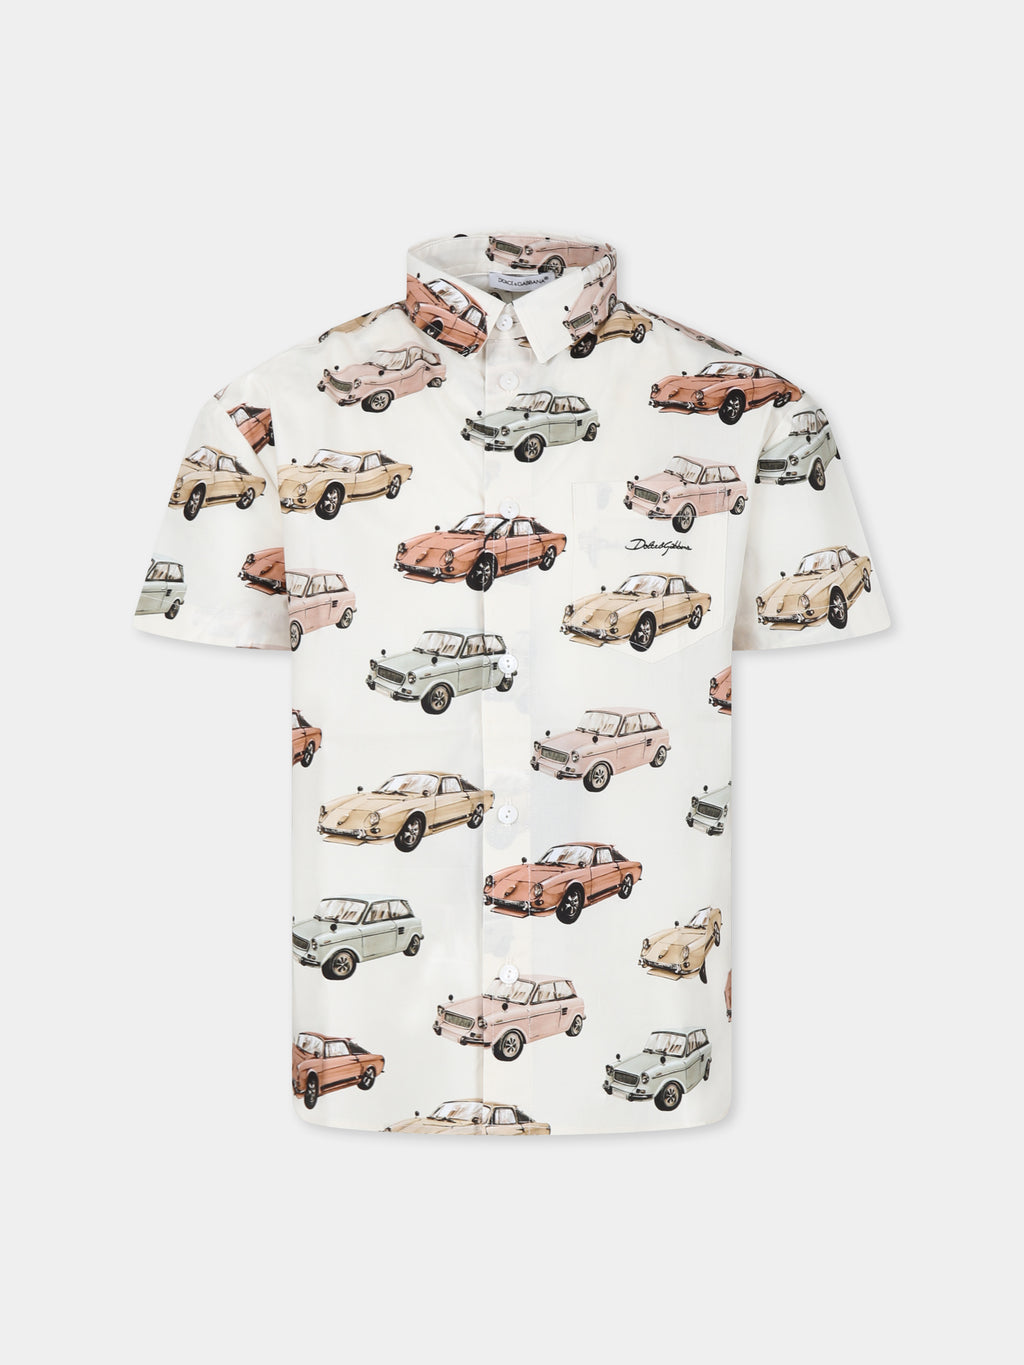 Ivory shirt for boy with vintage cars models